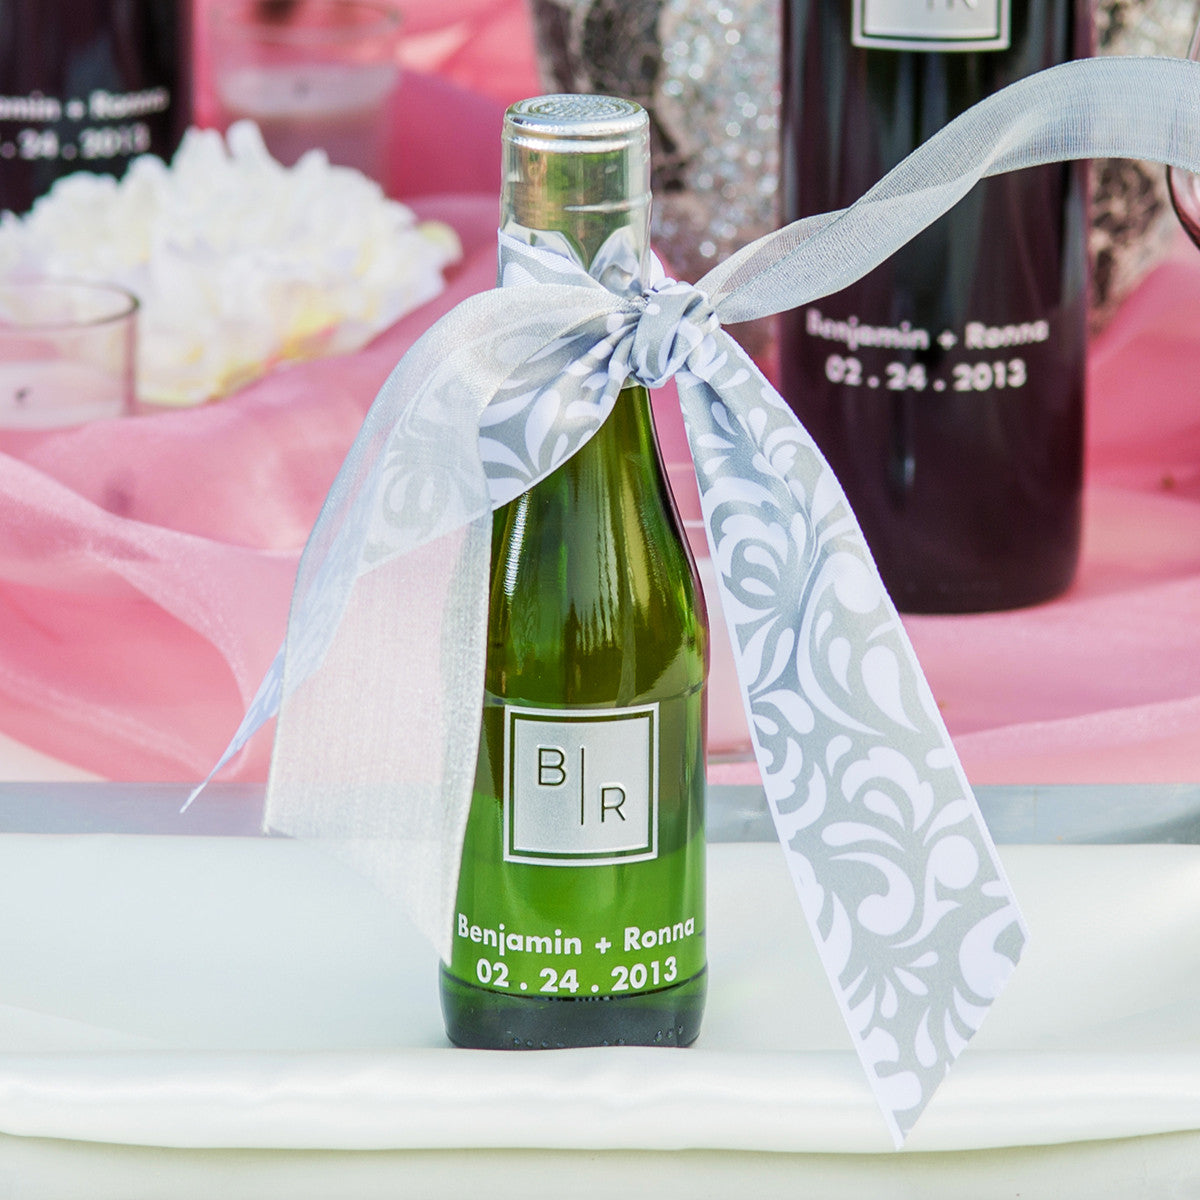 Personalised champagne gift - Piper Heidsieck | YourSurprise